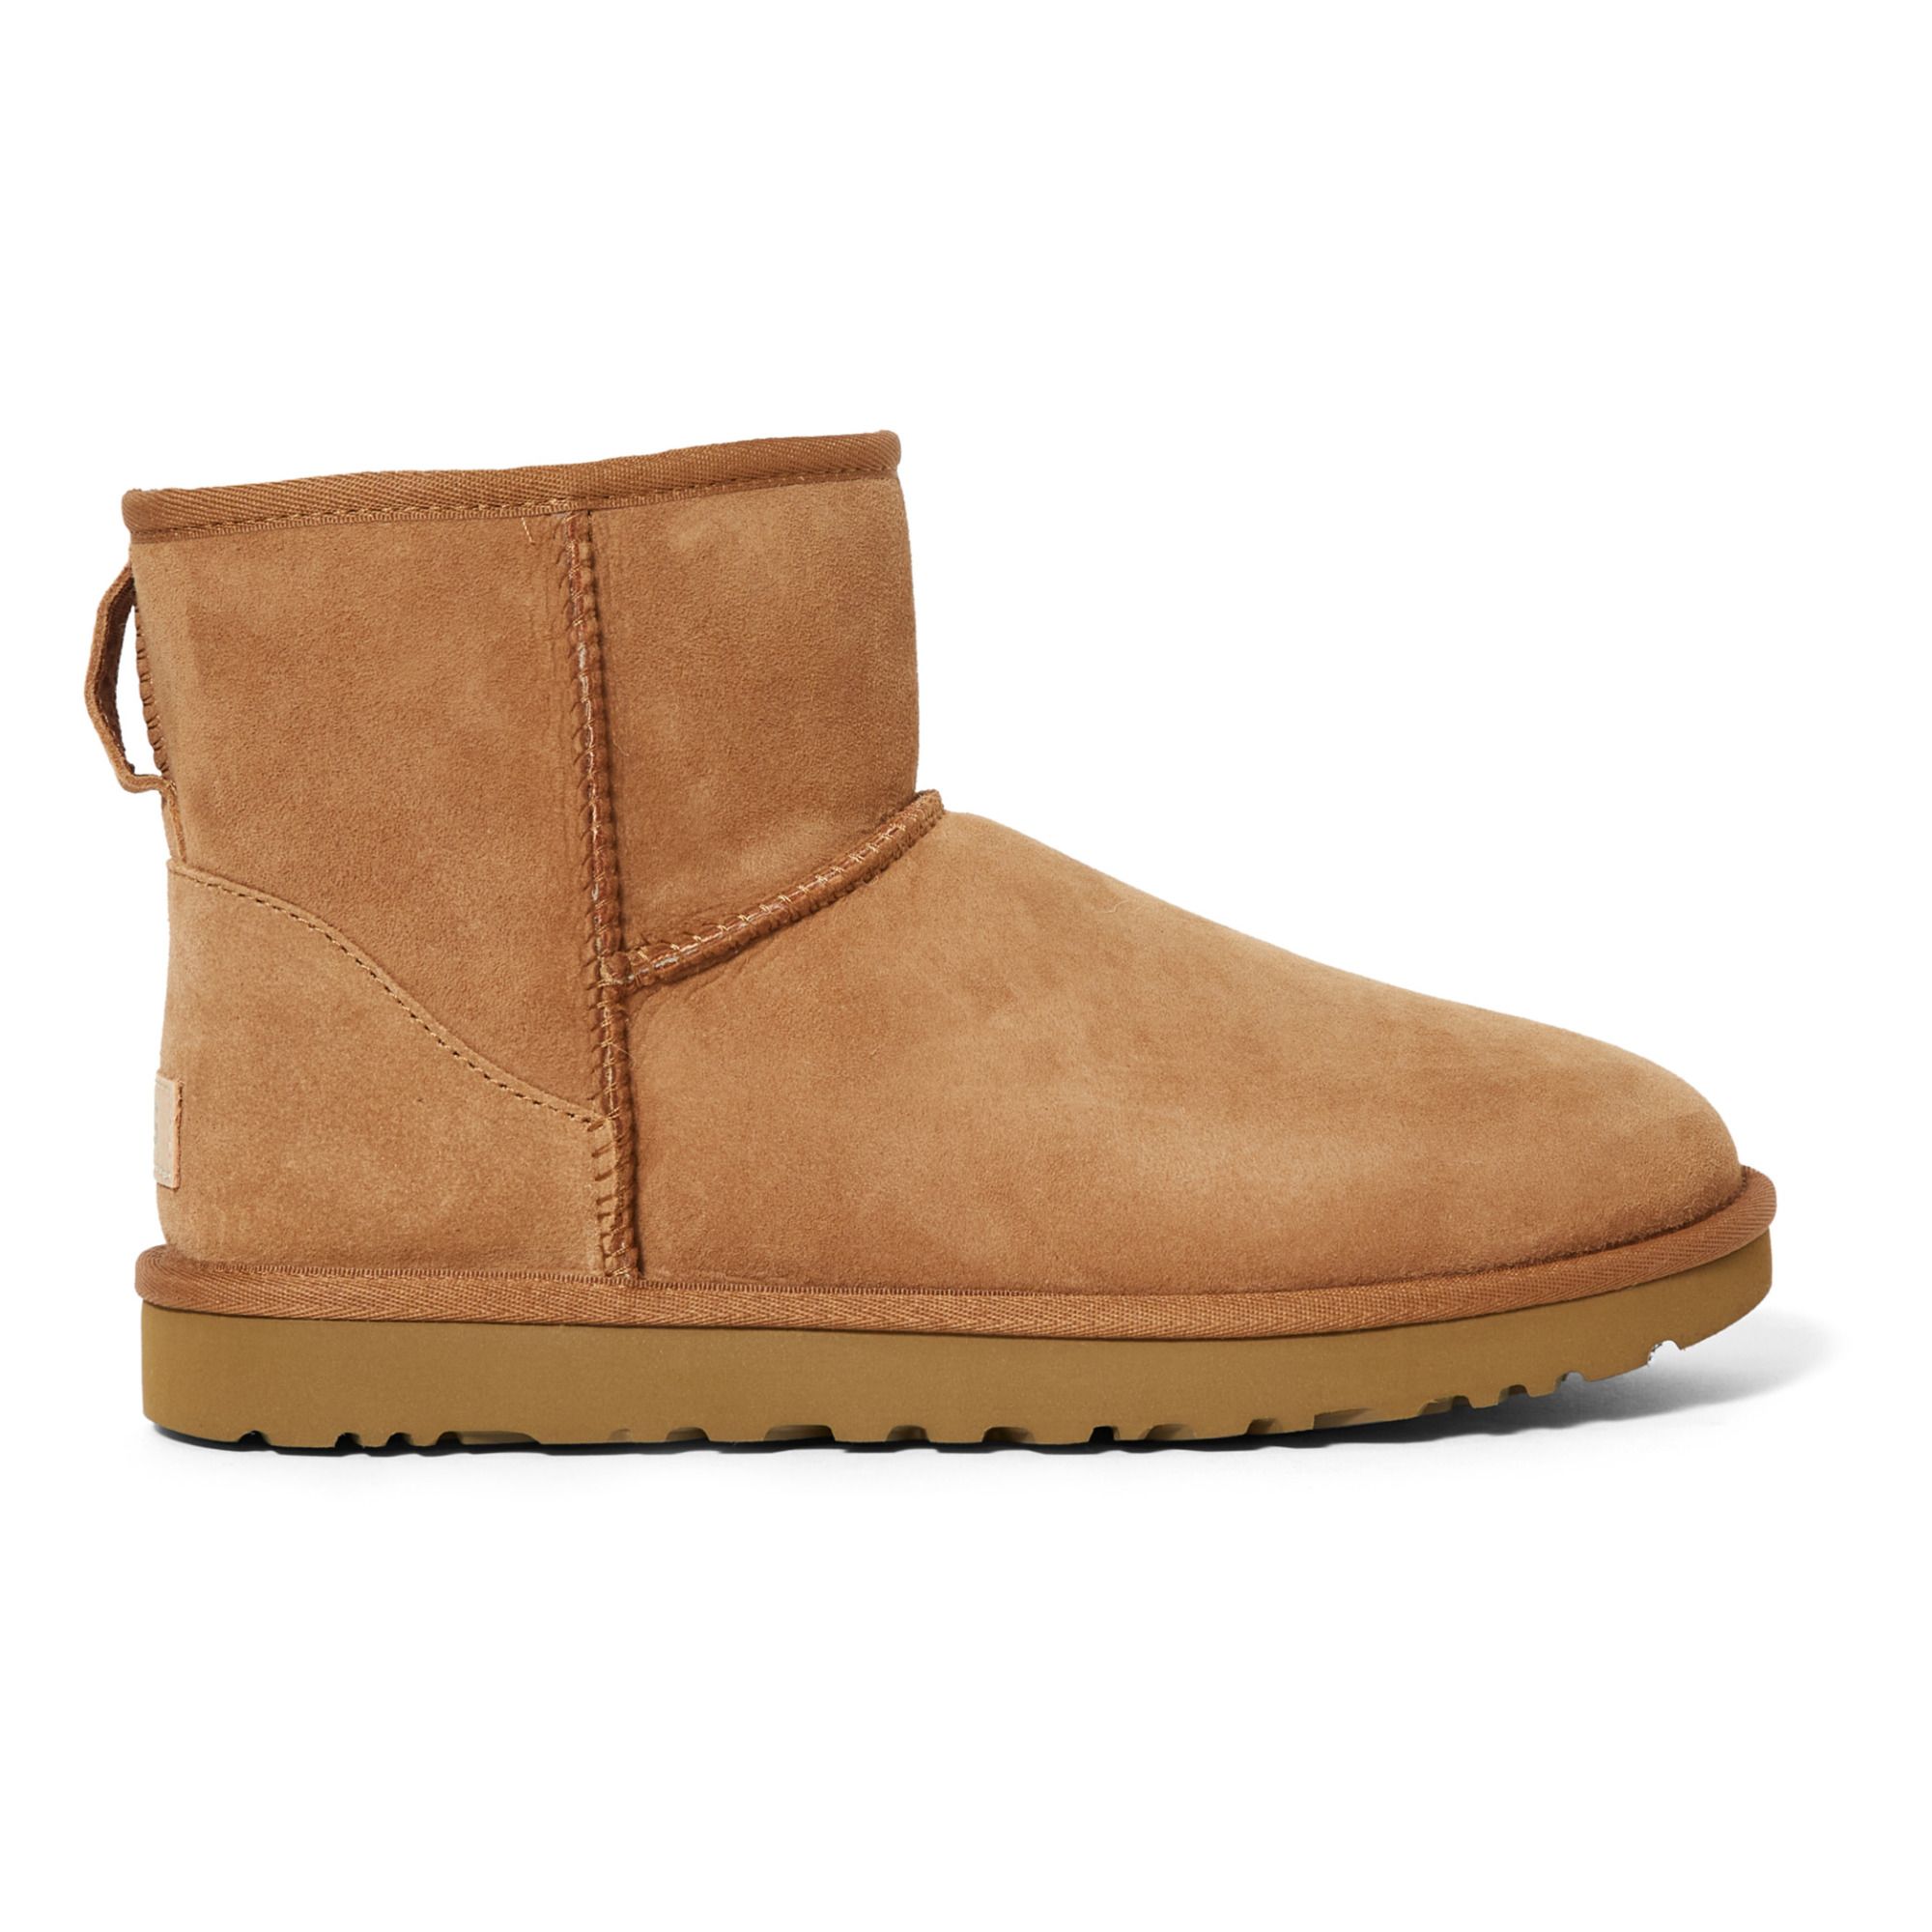 Ugg - Boots Classic Mini II - Collection Femme - Camel